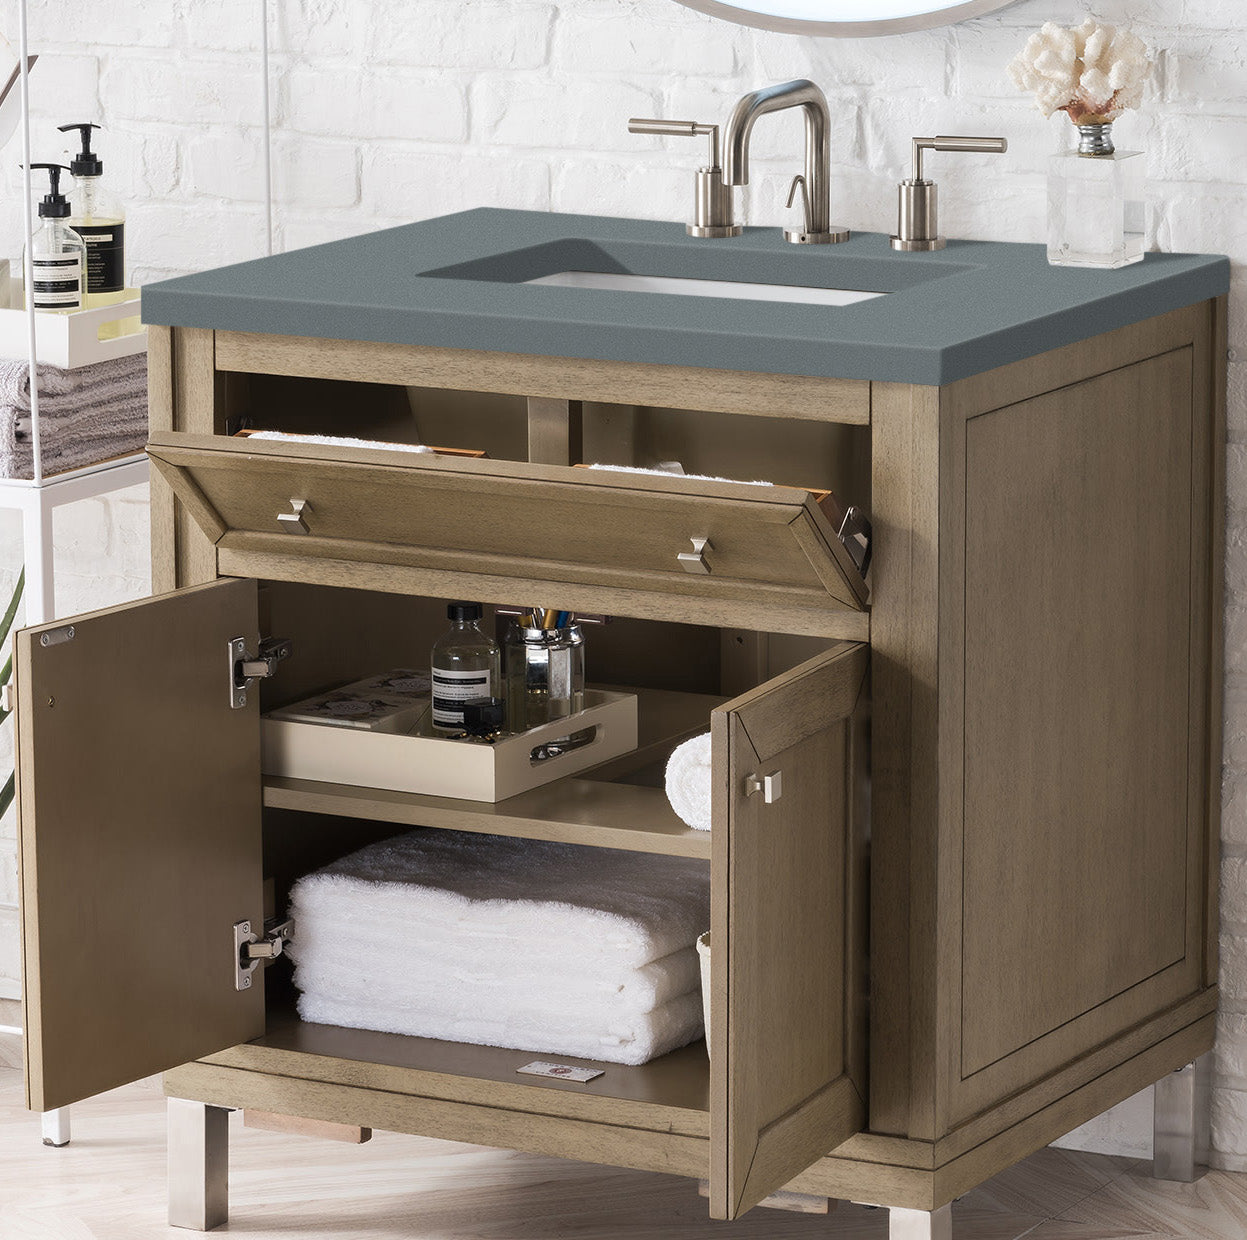 James Martin Vanities Chicago Collection 30 in. Single Vanity in Whitewashed Walnut with Countertop Options